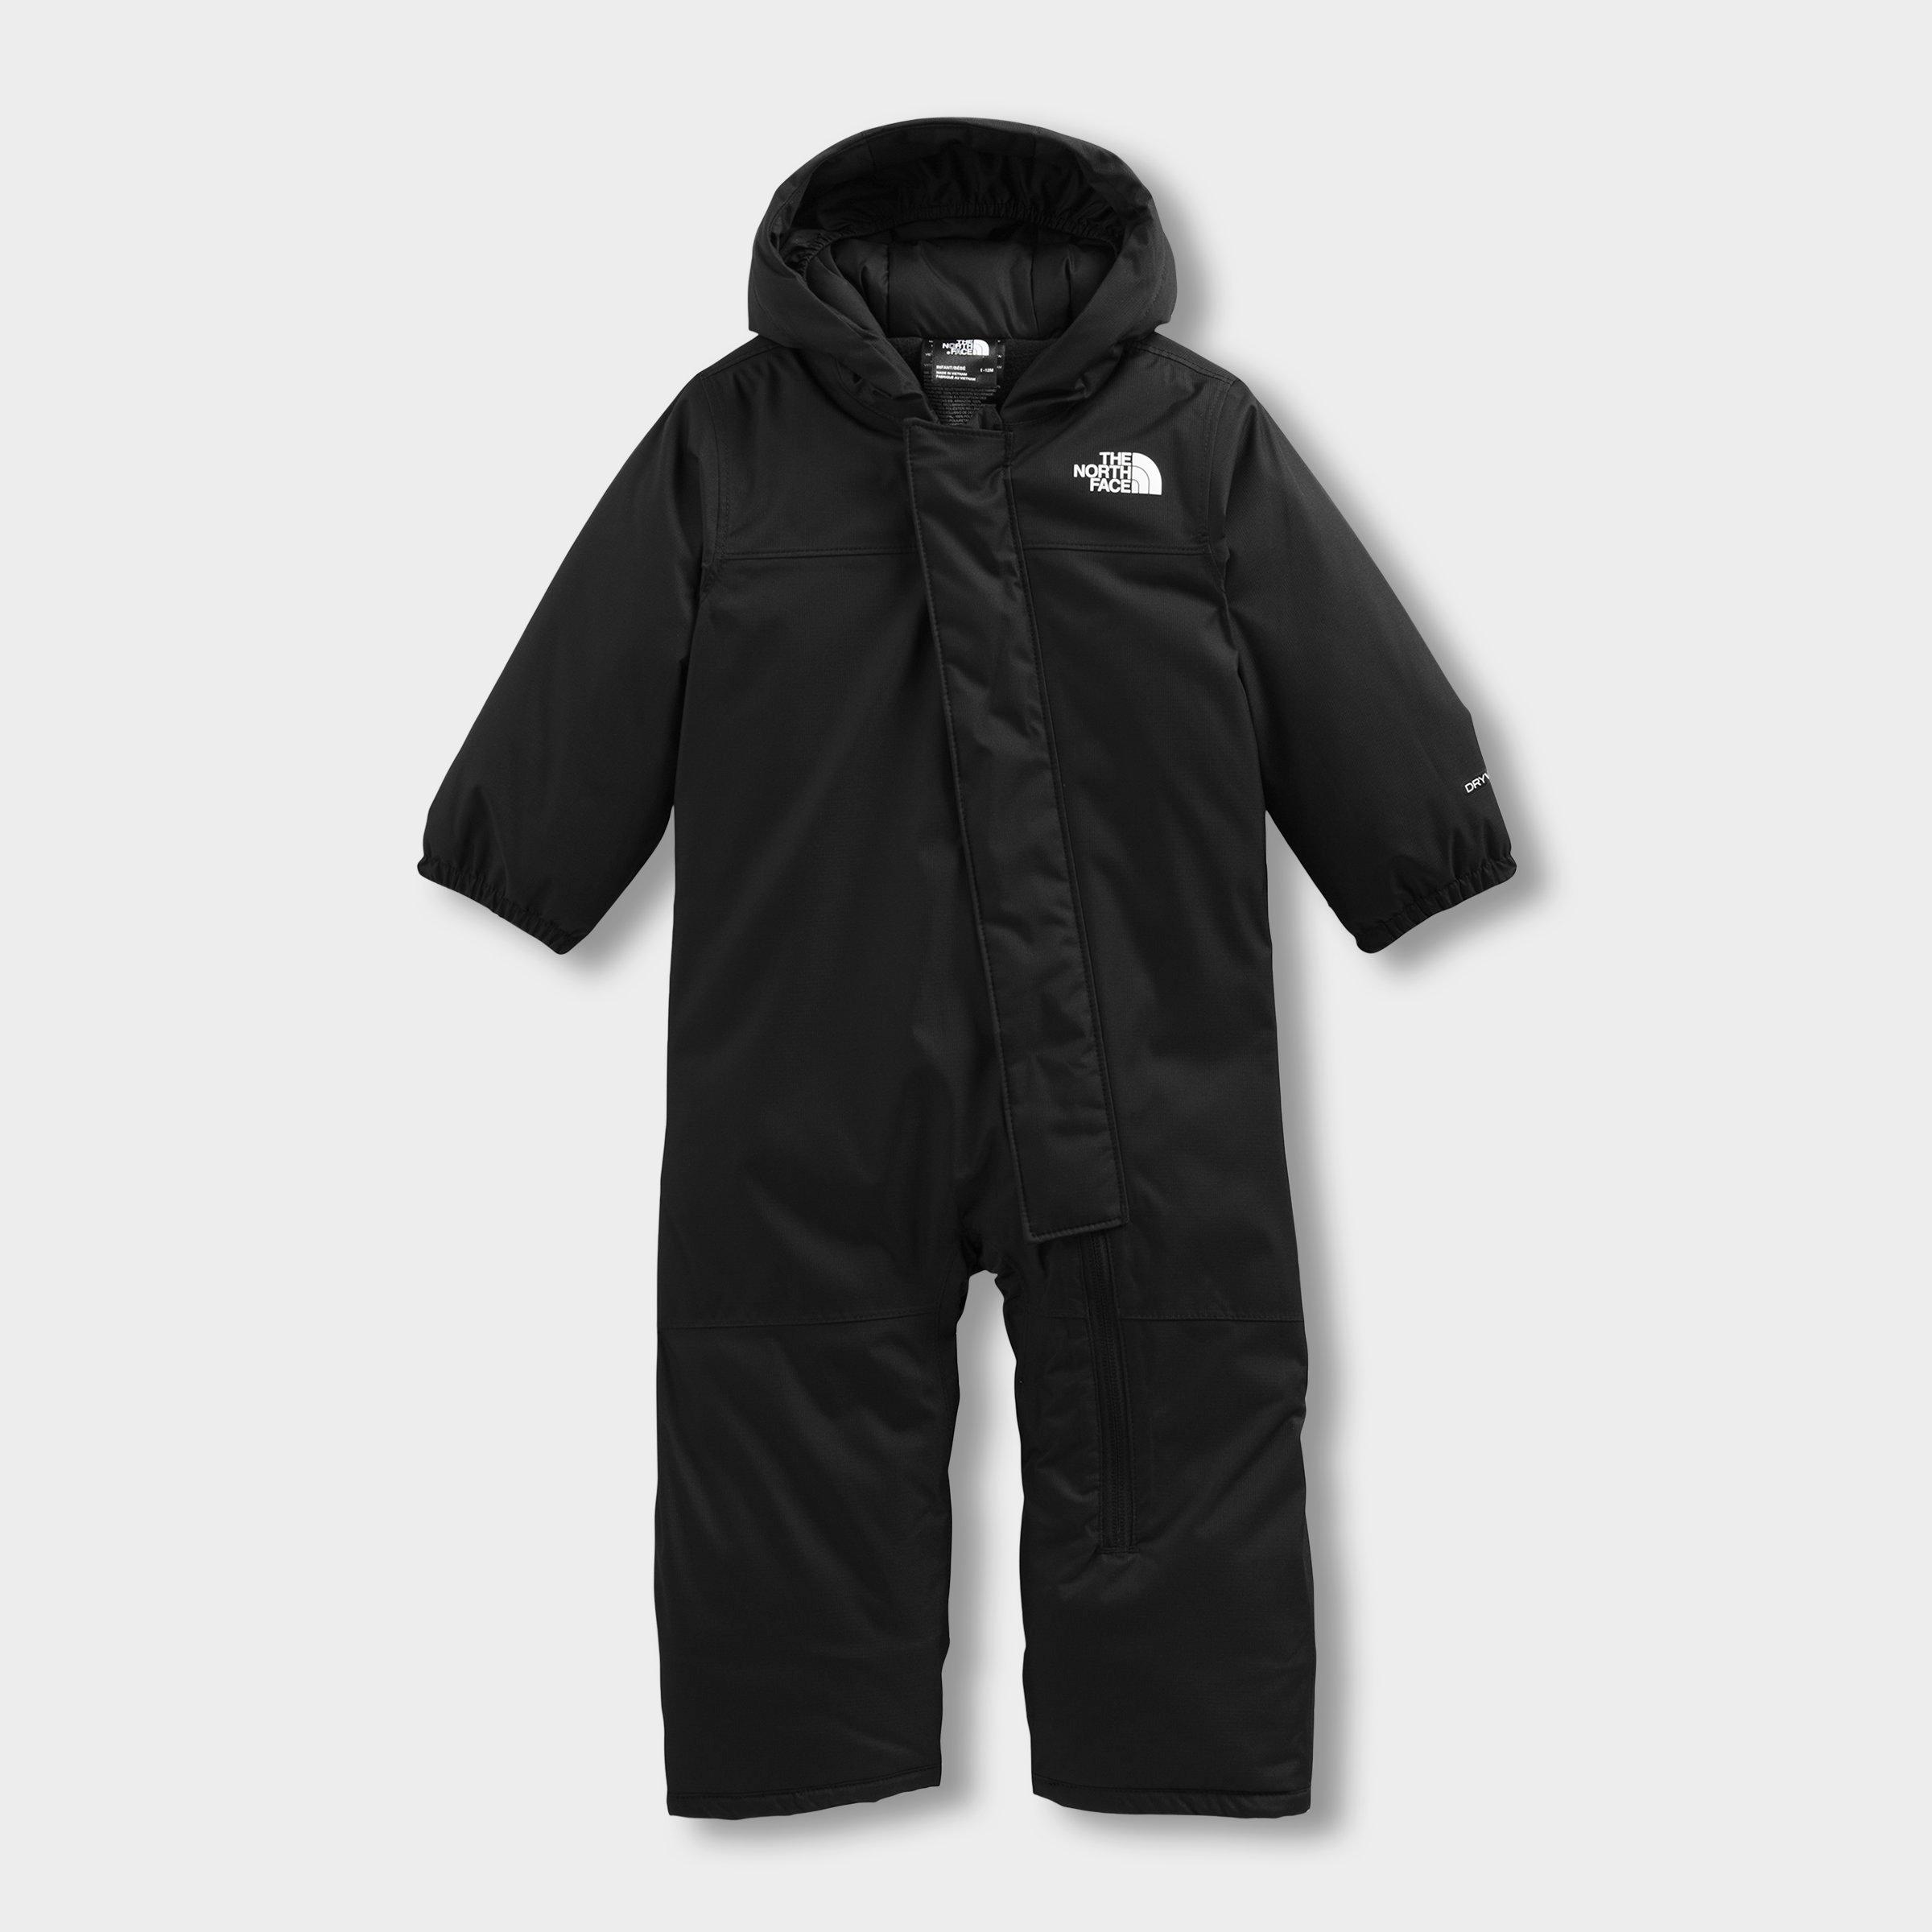 Infant The North Face Inc Freedom Snow Suit